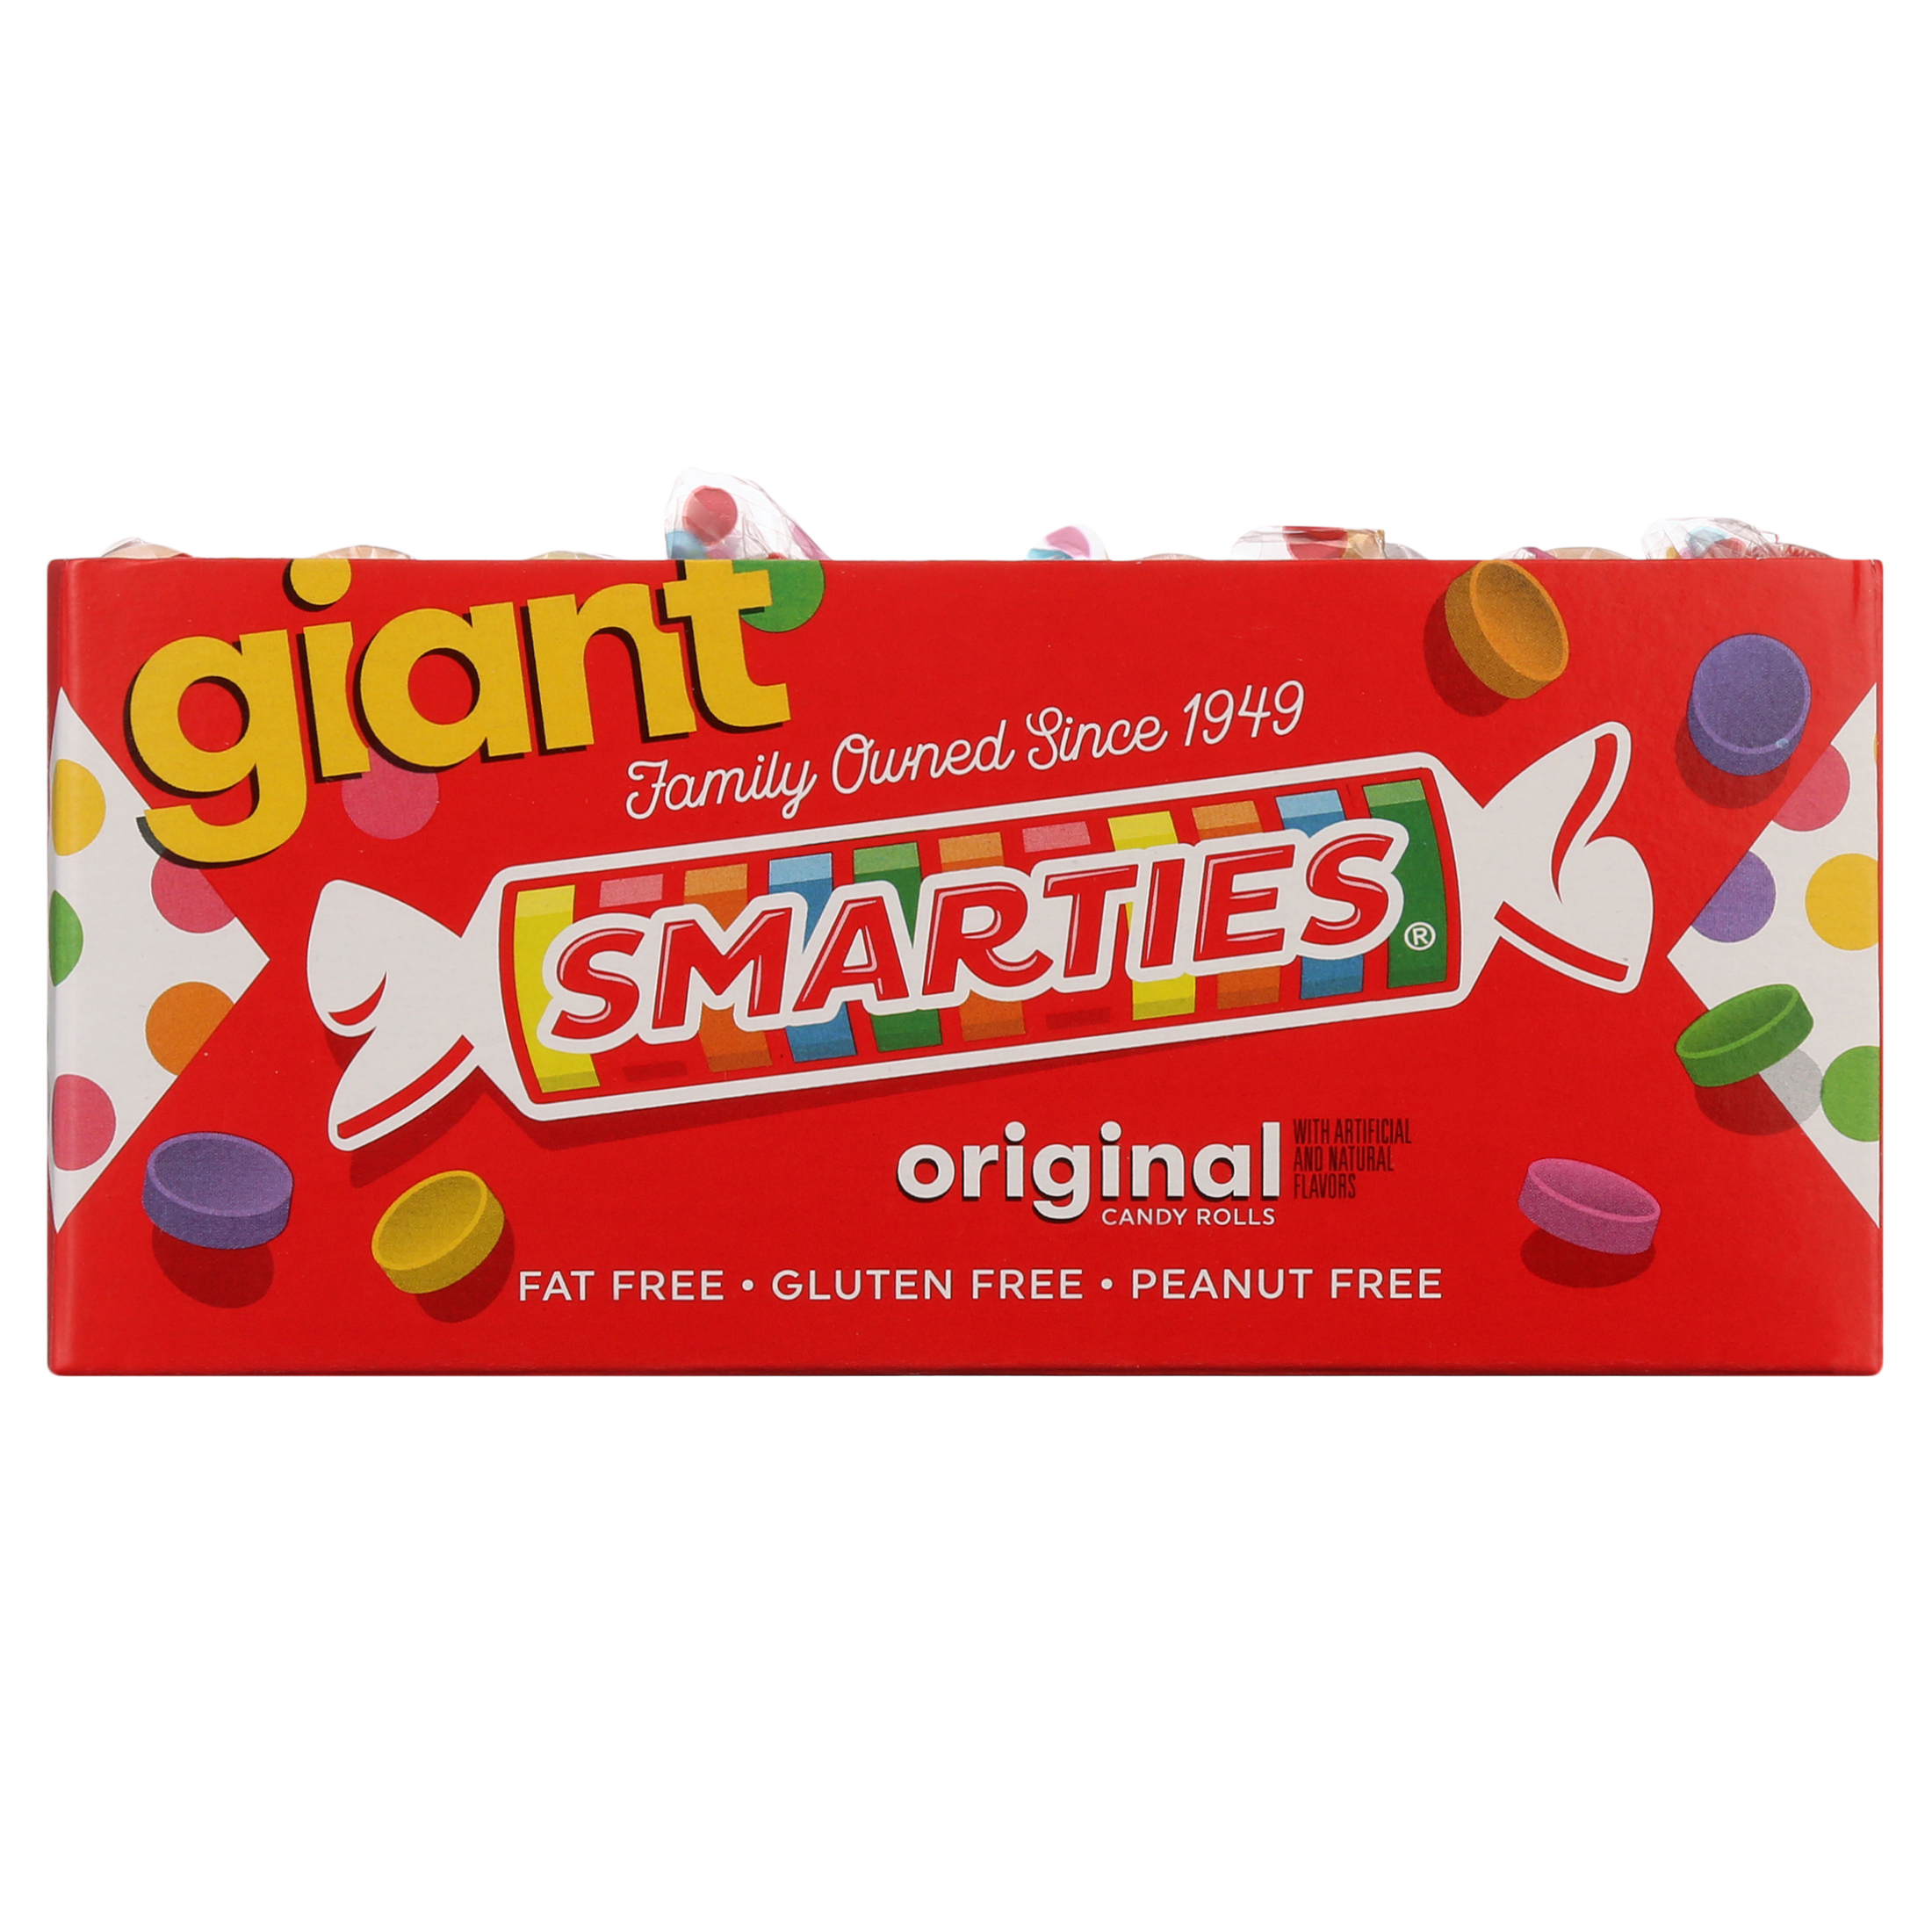 Smarties Candy Rolls, Giant, 36 Count - image 5 of 8